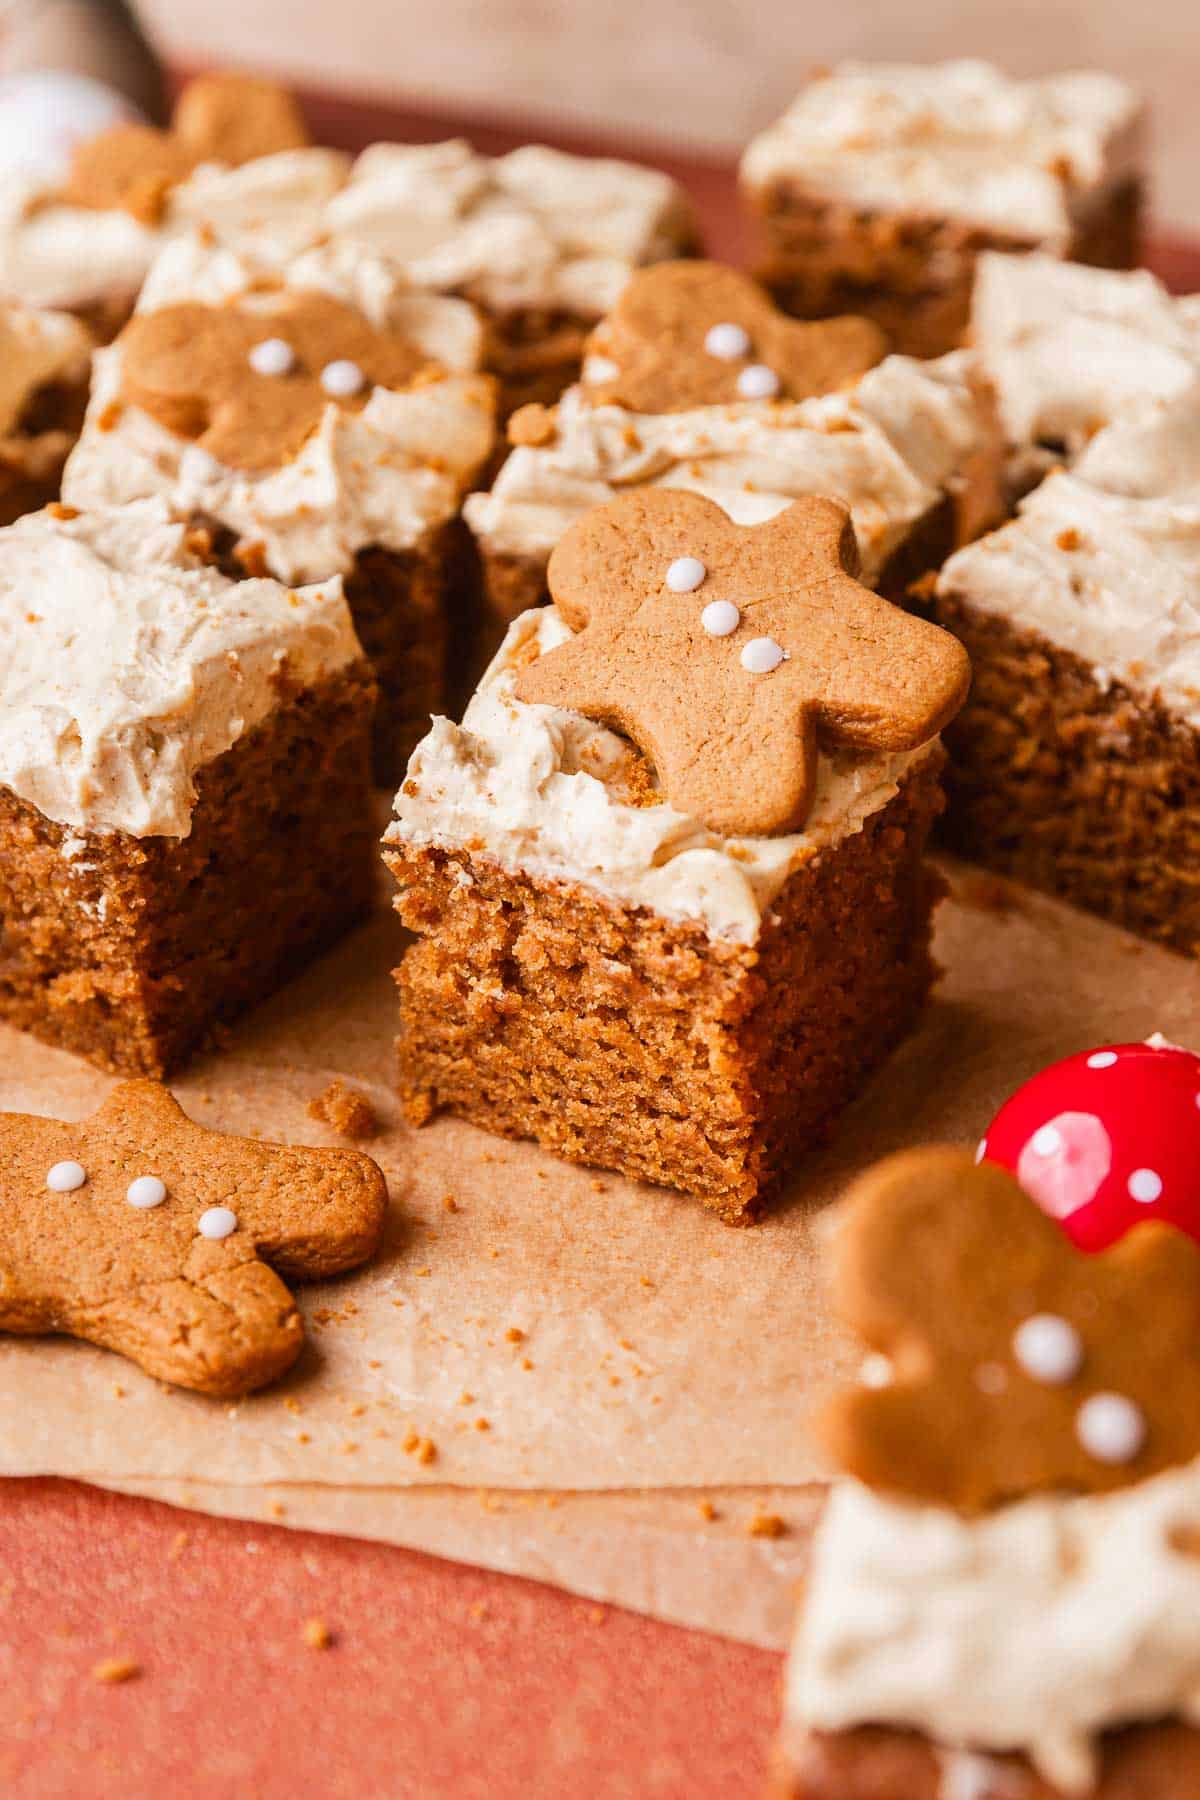 Slices of gingerbread cake with molasses frosting and mini gingerbread cookies on top.